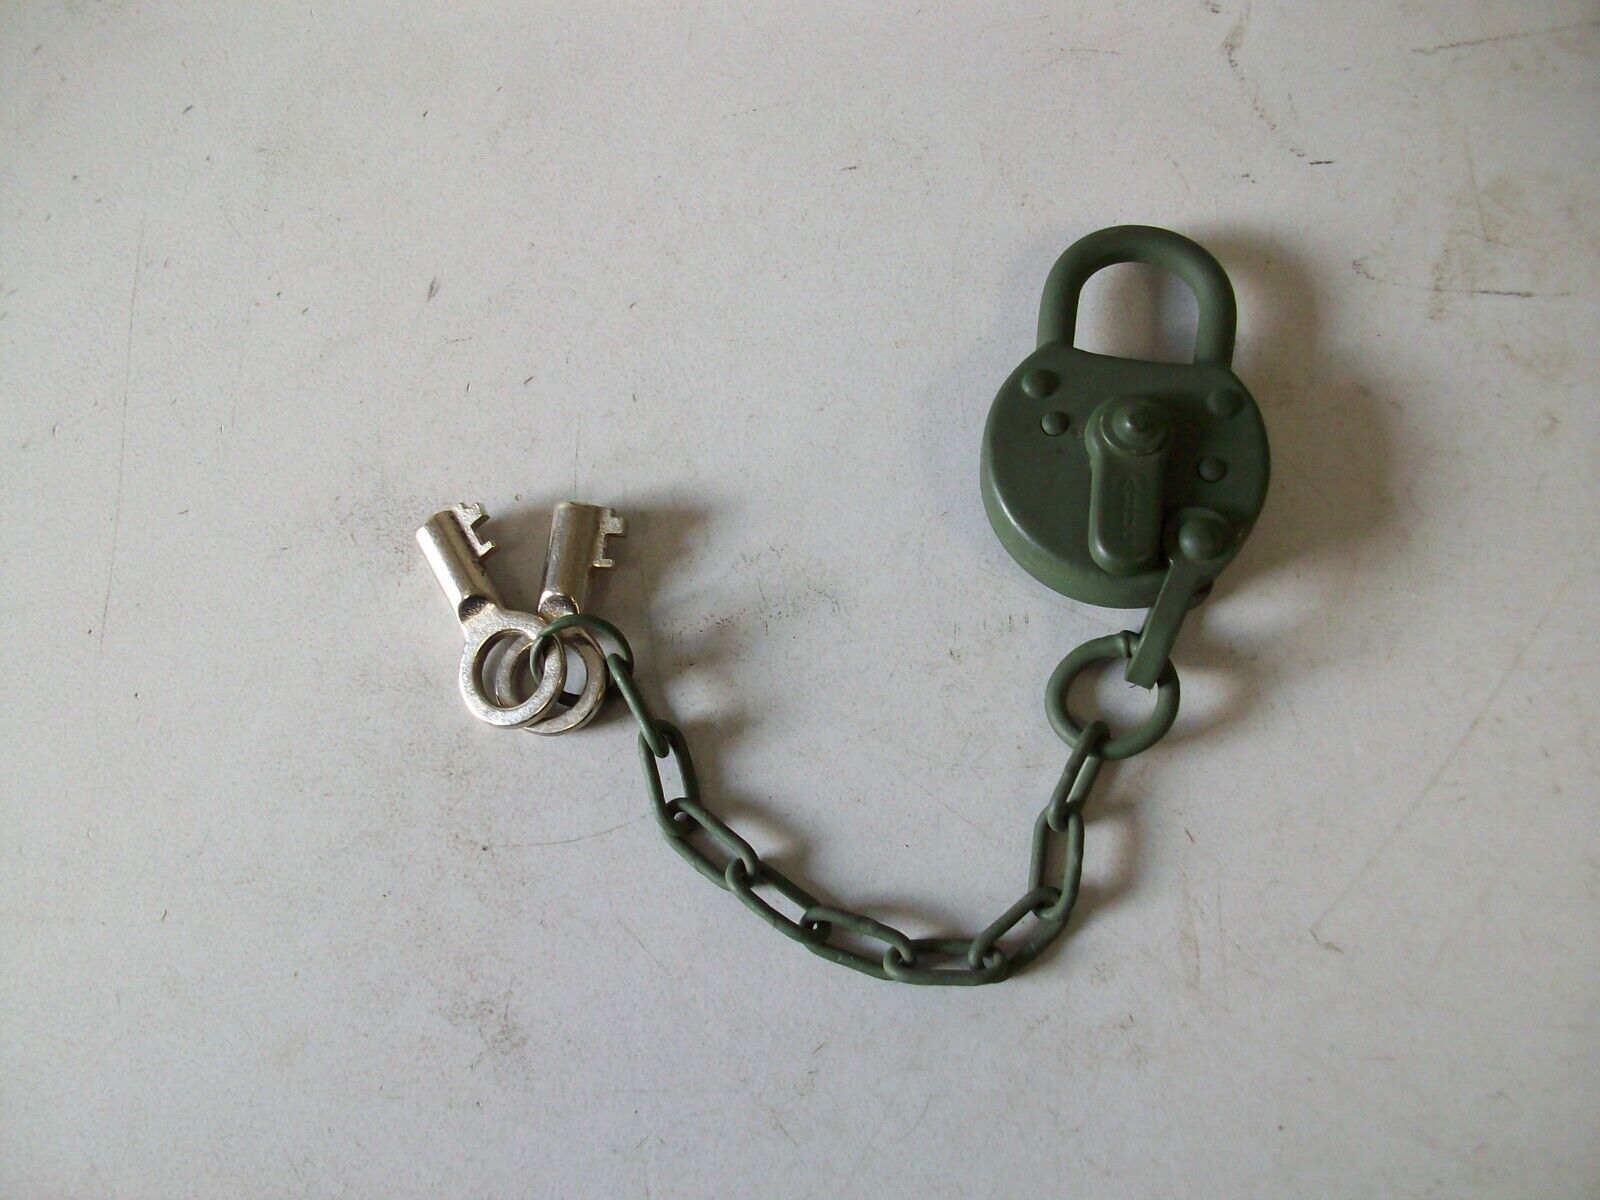 Vintage Military ABUS lock for Unimog or Pinzgauer tool boxes